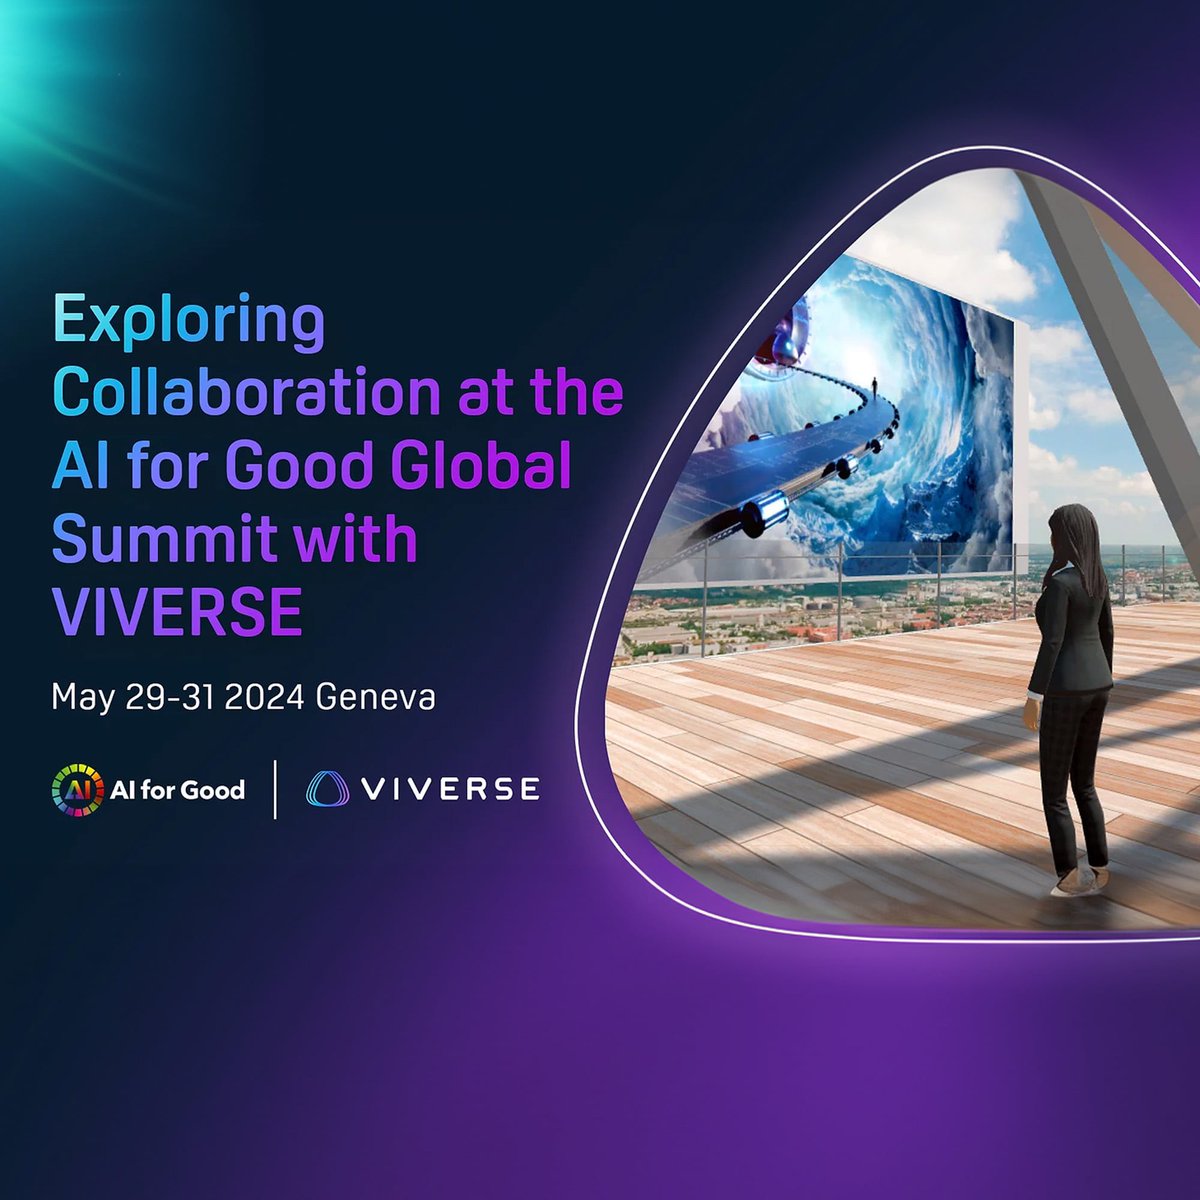 Join us at the @AIforGood Global Summit to discover how VIVERSE is advancing professional collaboration and explore the limitless possibilities when art and technology converge: htcvive.co/AFG24GX #AI #Collaboration #AIforGood #GlobalSummit #Geneva